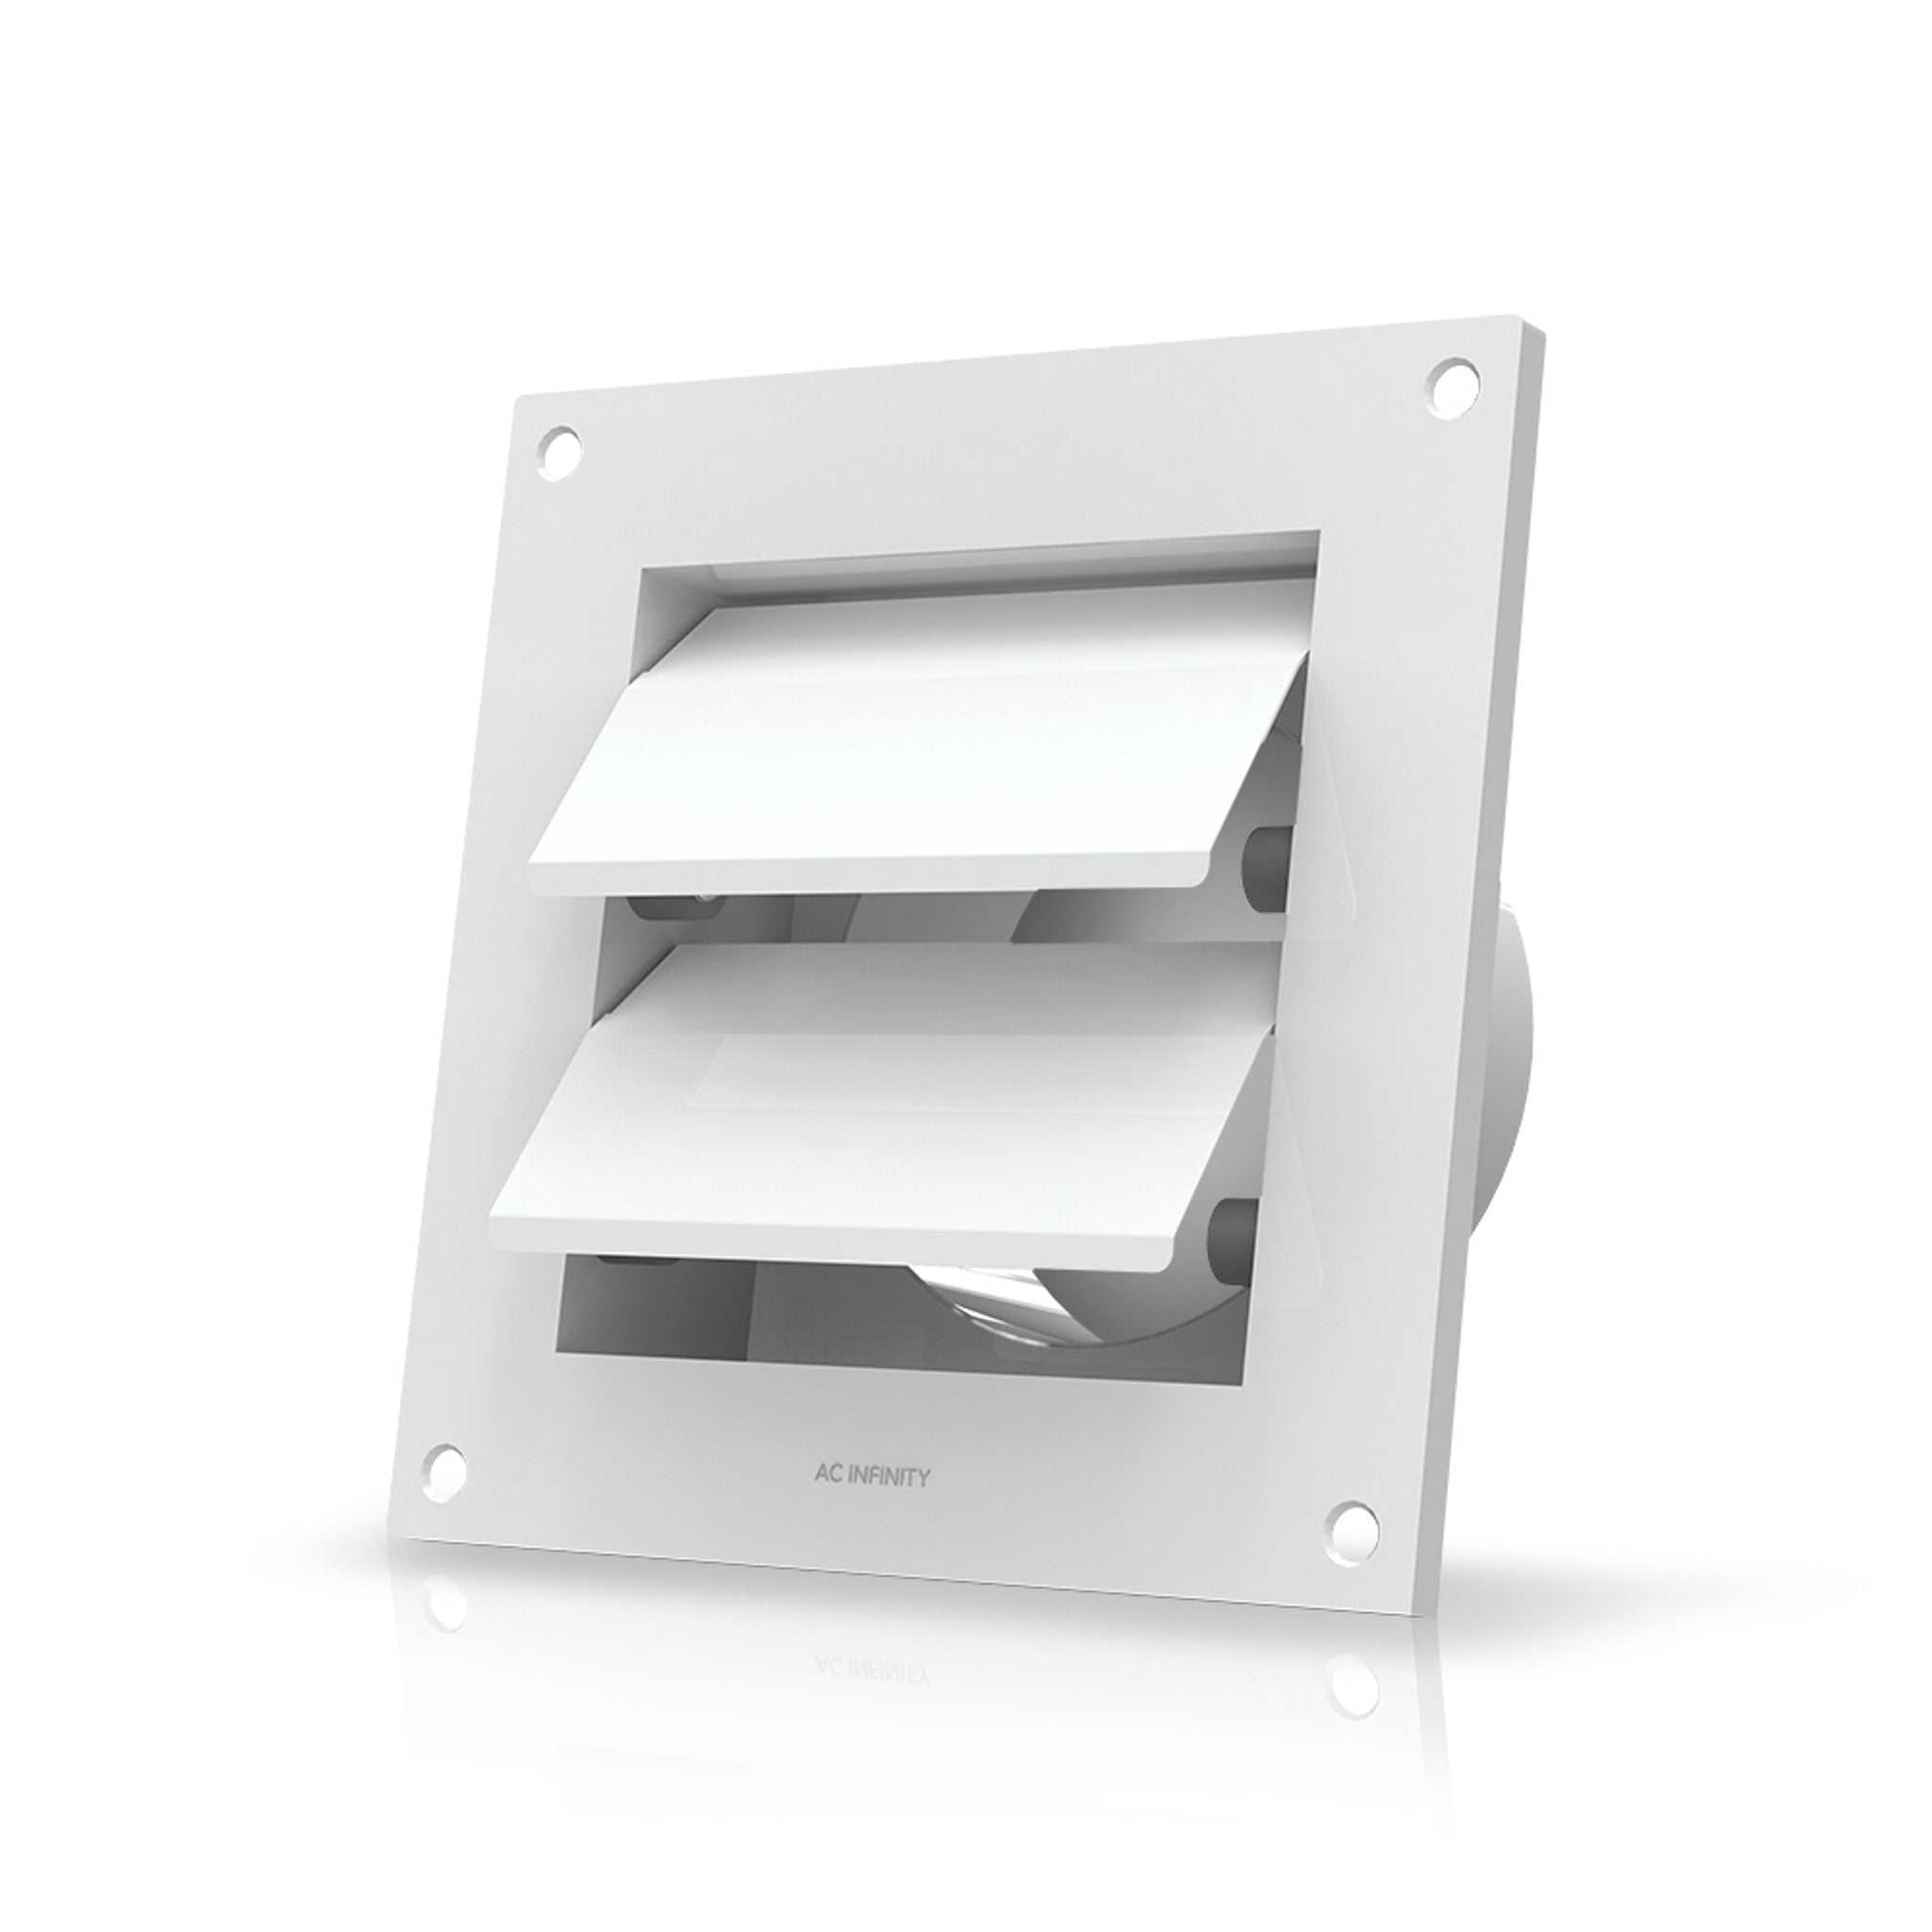 Product Image:AC Infinity Wall Mount Duct Shutter, White Steel